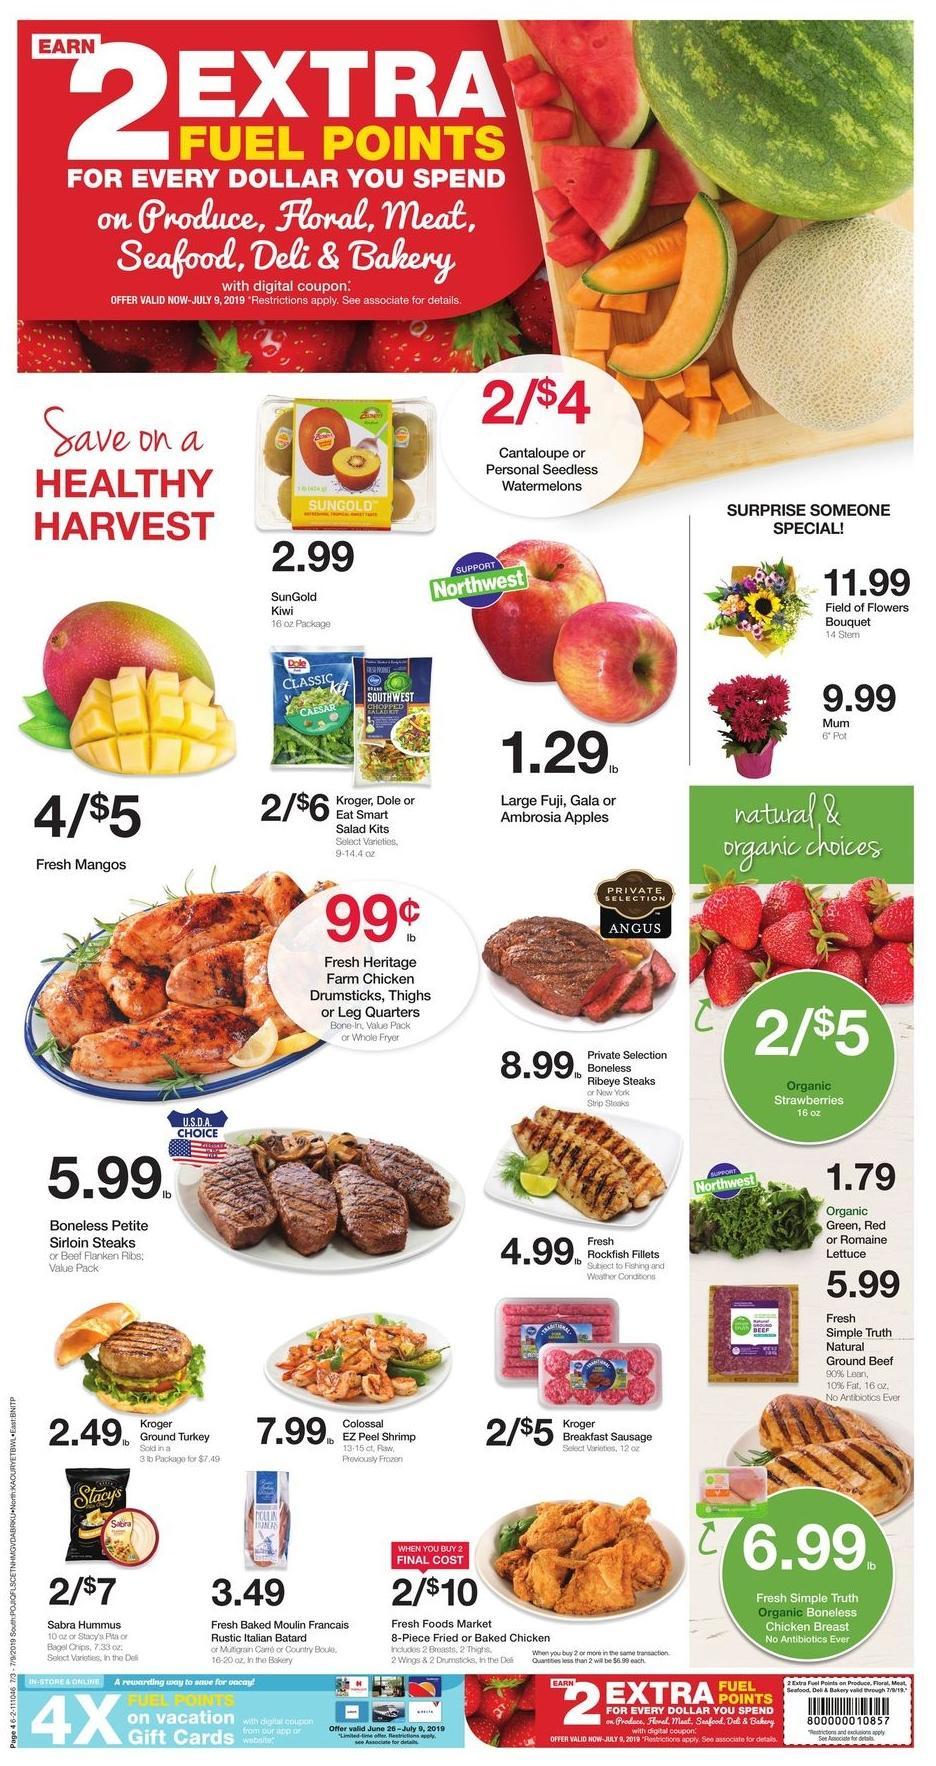 Fred Meyer Weekly Ad from July 3